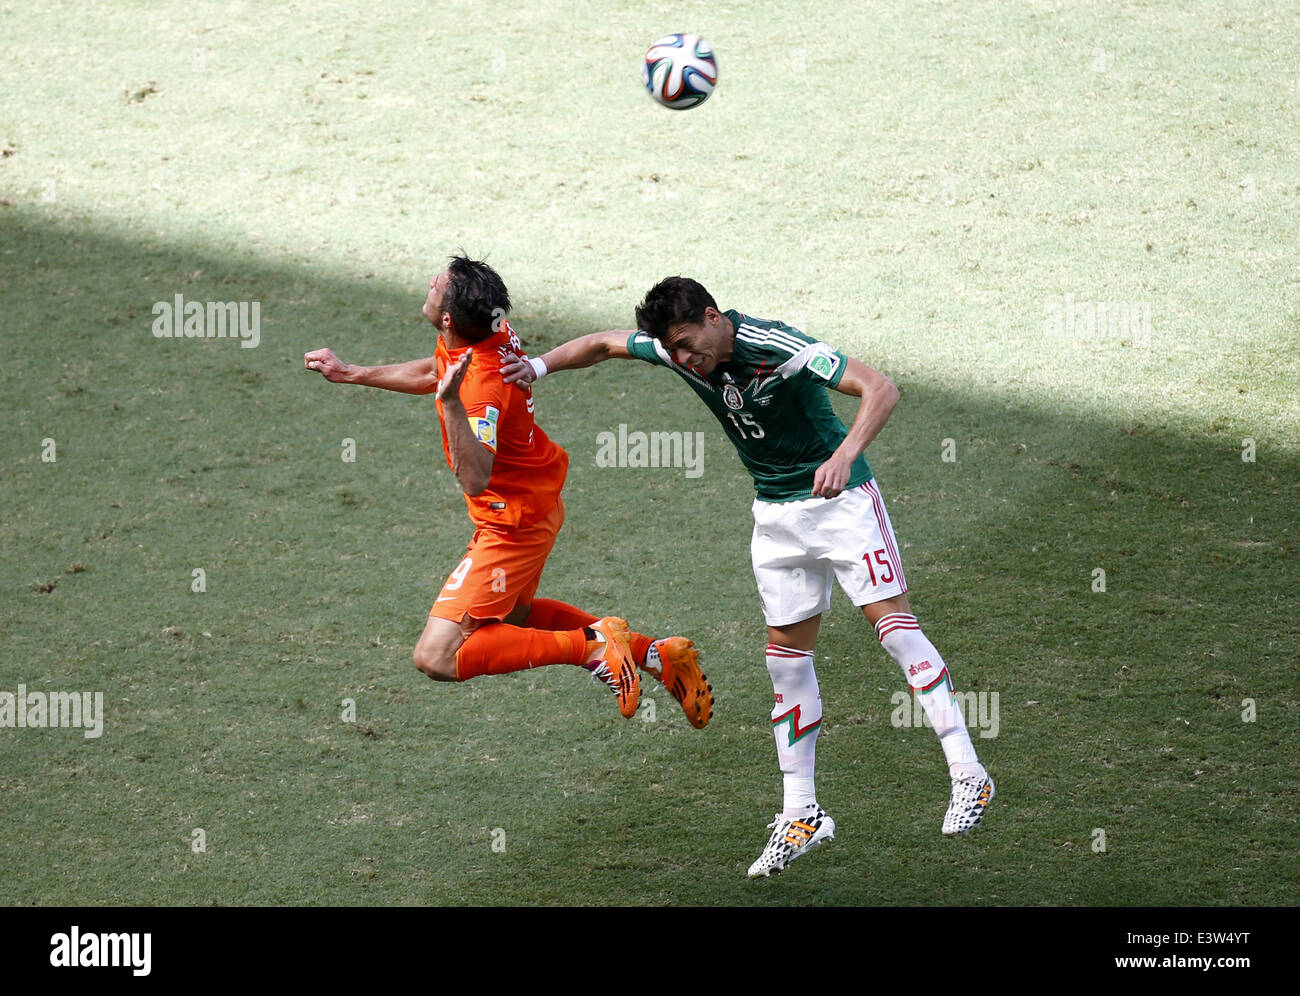 Fortaleza, Brazil. 29th June, 2014. Mexico's Hector Moreno (R) vies with Netherlands' Robin van Persie during a Round of 16 match between Netherlands and Mexico of 2014 FIFA World Cup at the Estadio Castelao Stadium in Fortaleza, Brazil, on June 29, 2014. Credit:  Liao Yujie/Xinhua/Alamy Live News Stock Photo